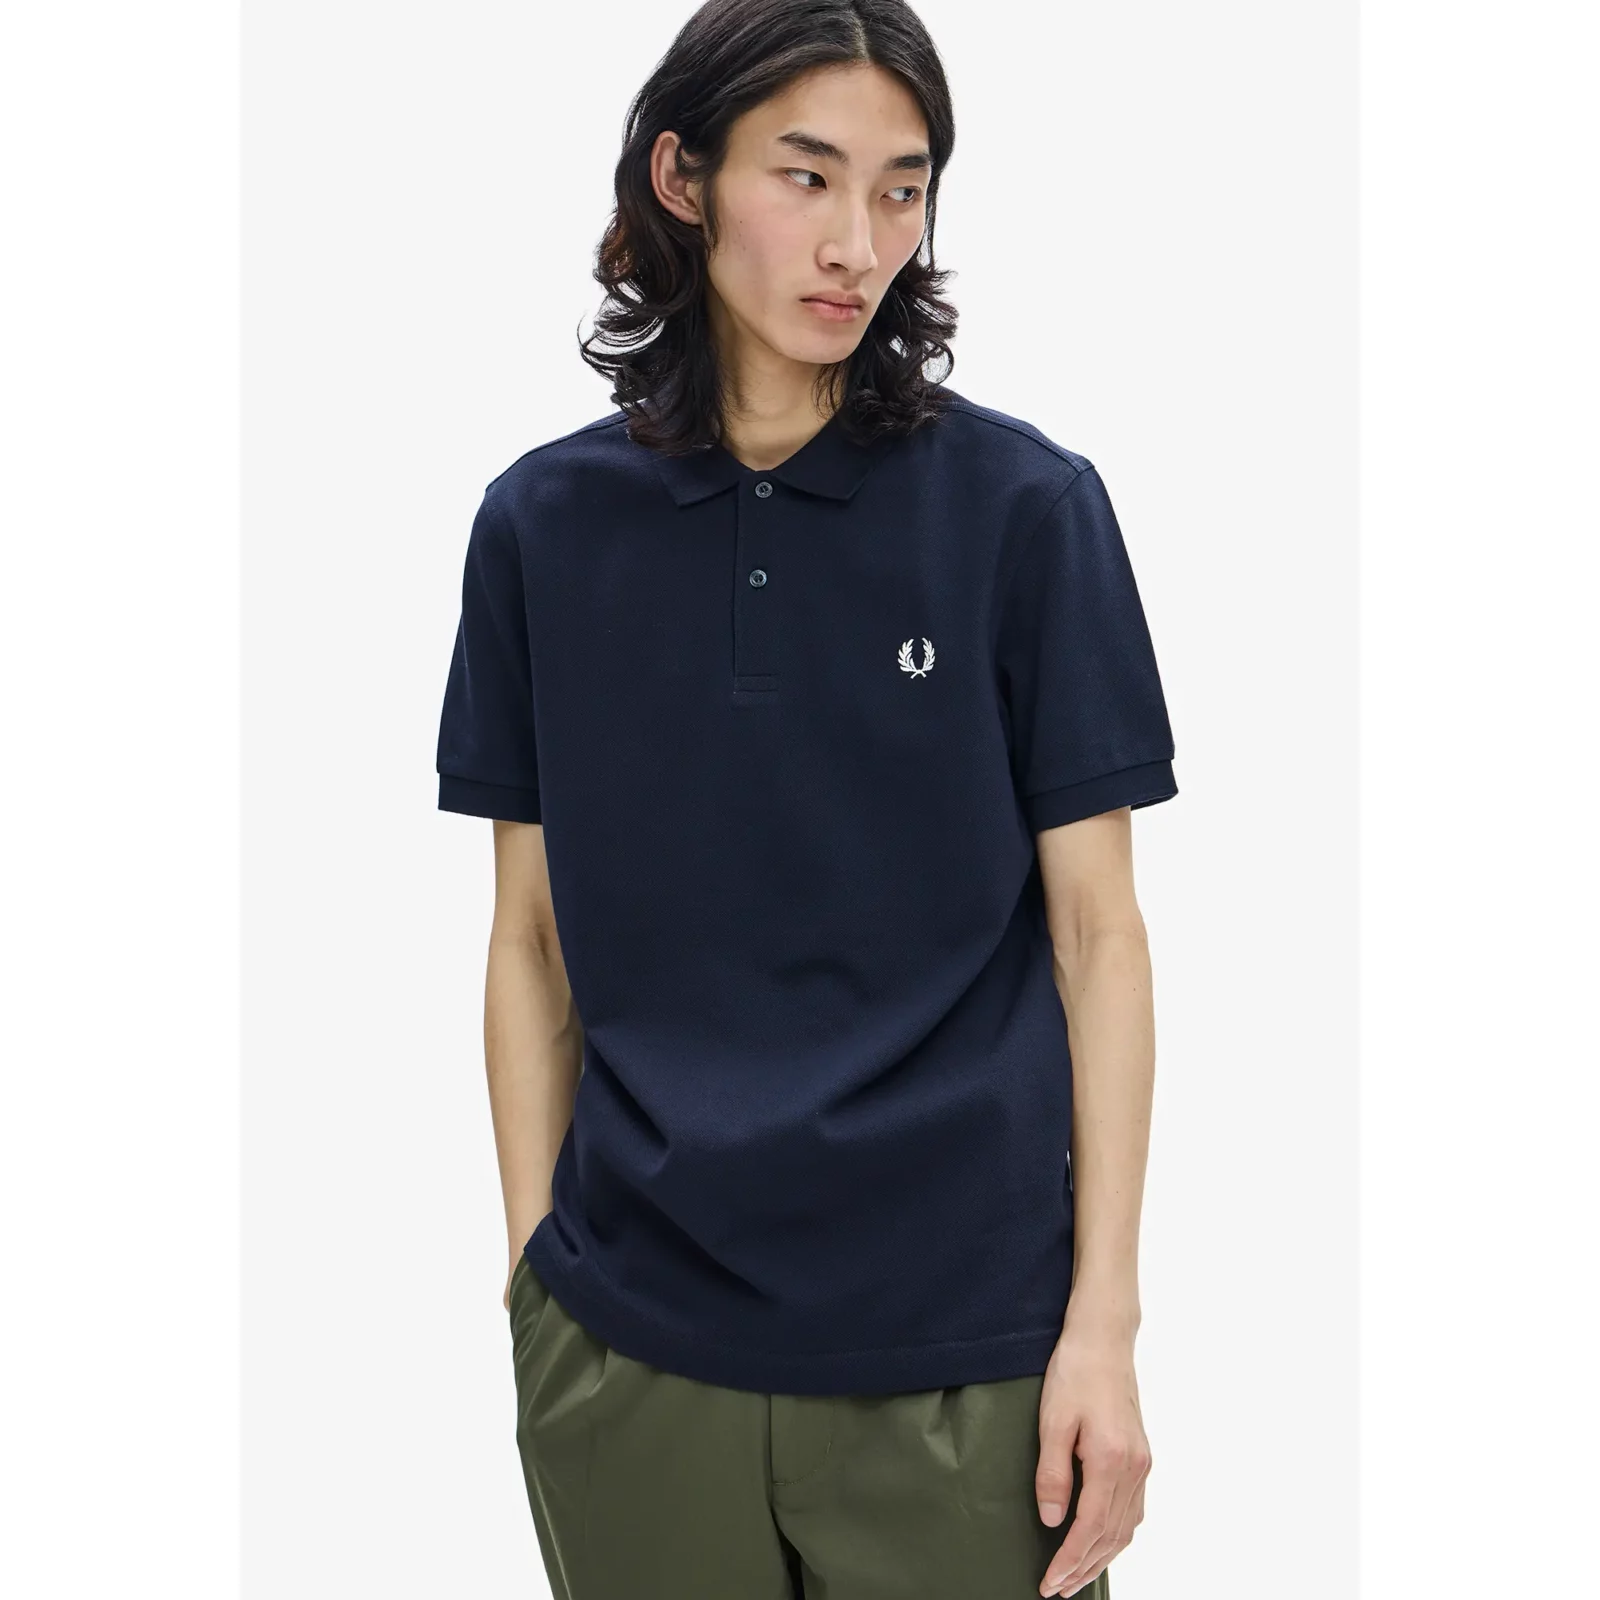 Fred-Perry_-M-6000-the-fred-perry-shirt_tummansininen_M6000_608